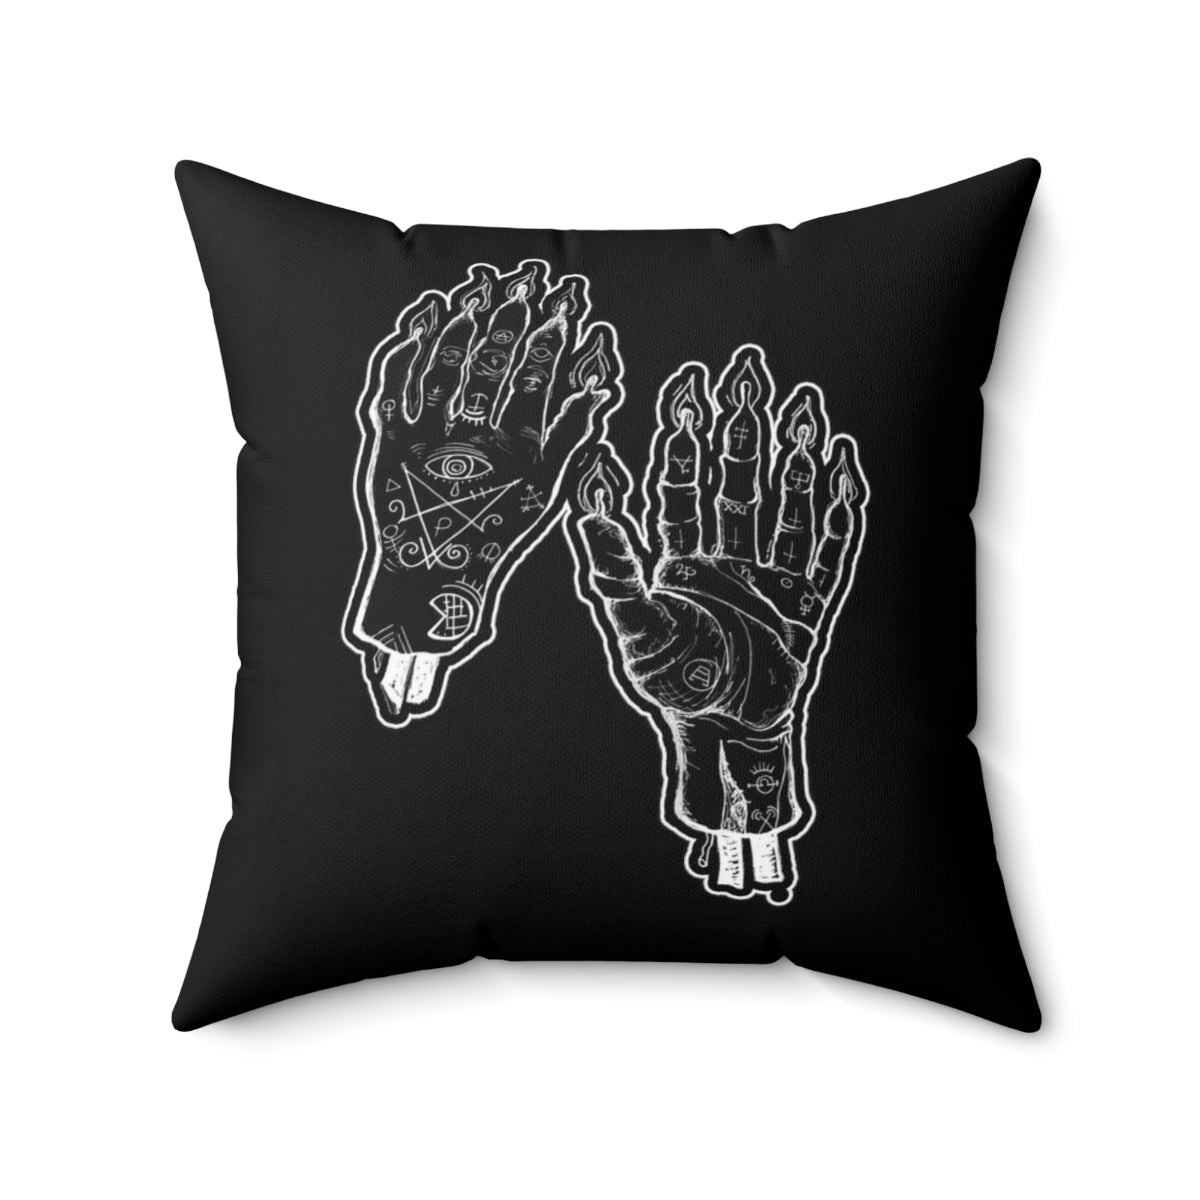 Hands of Glory Pillow